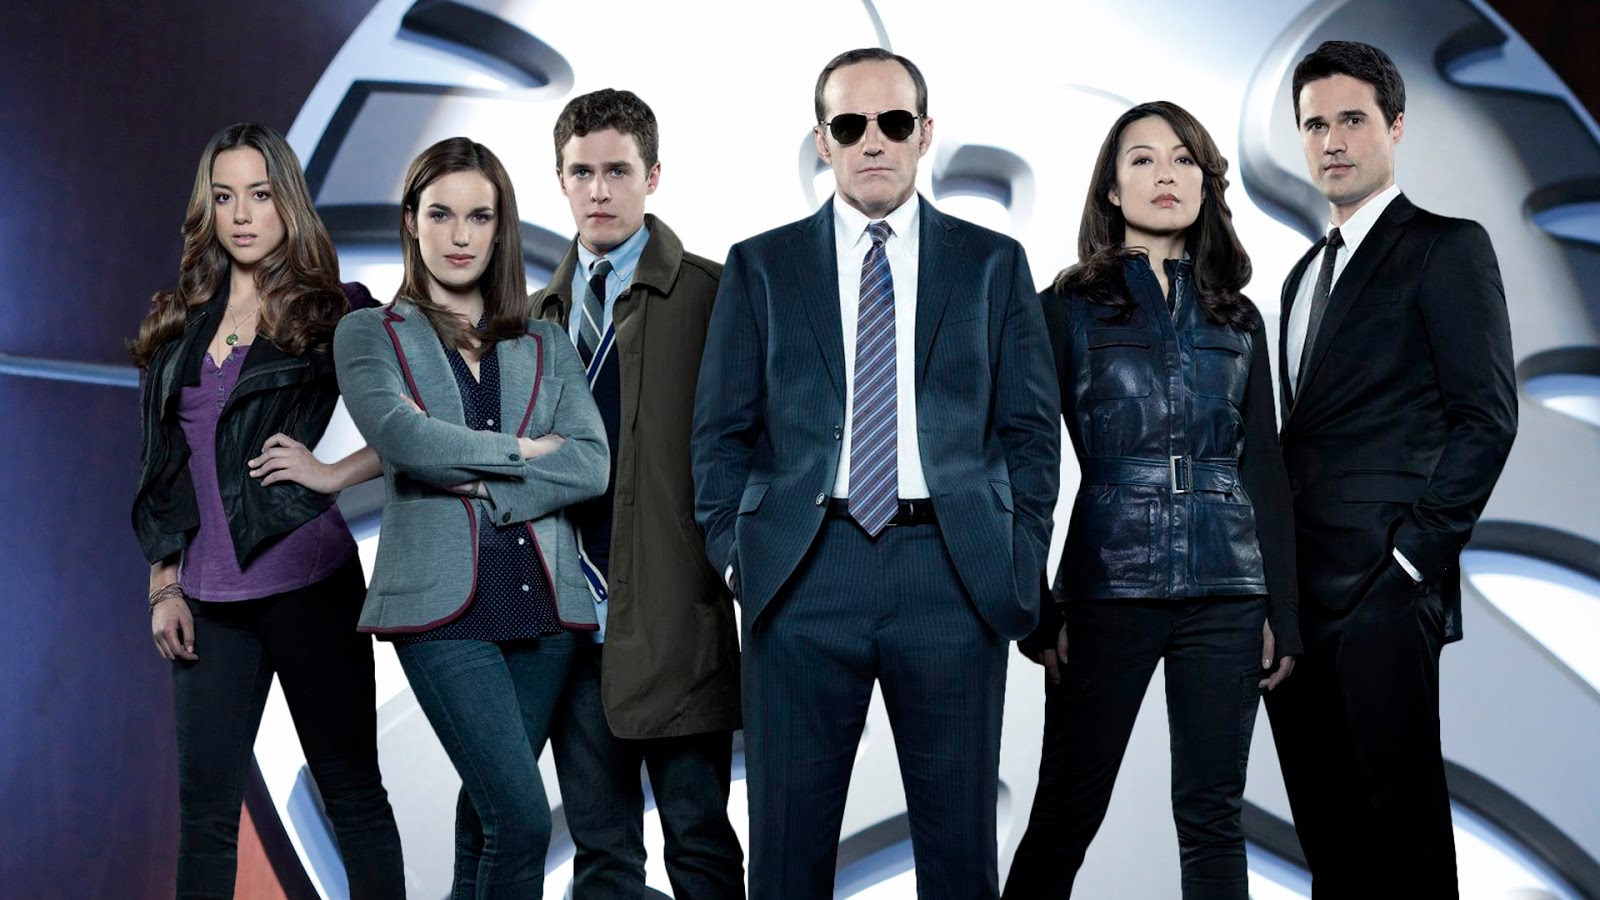 USD POLL : If you could choose one Avenger to appear in the Agents of SHIELD TV series, who would it be?